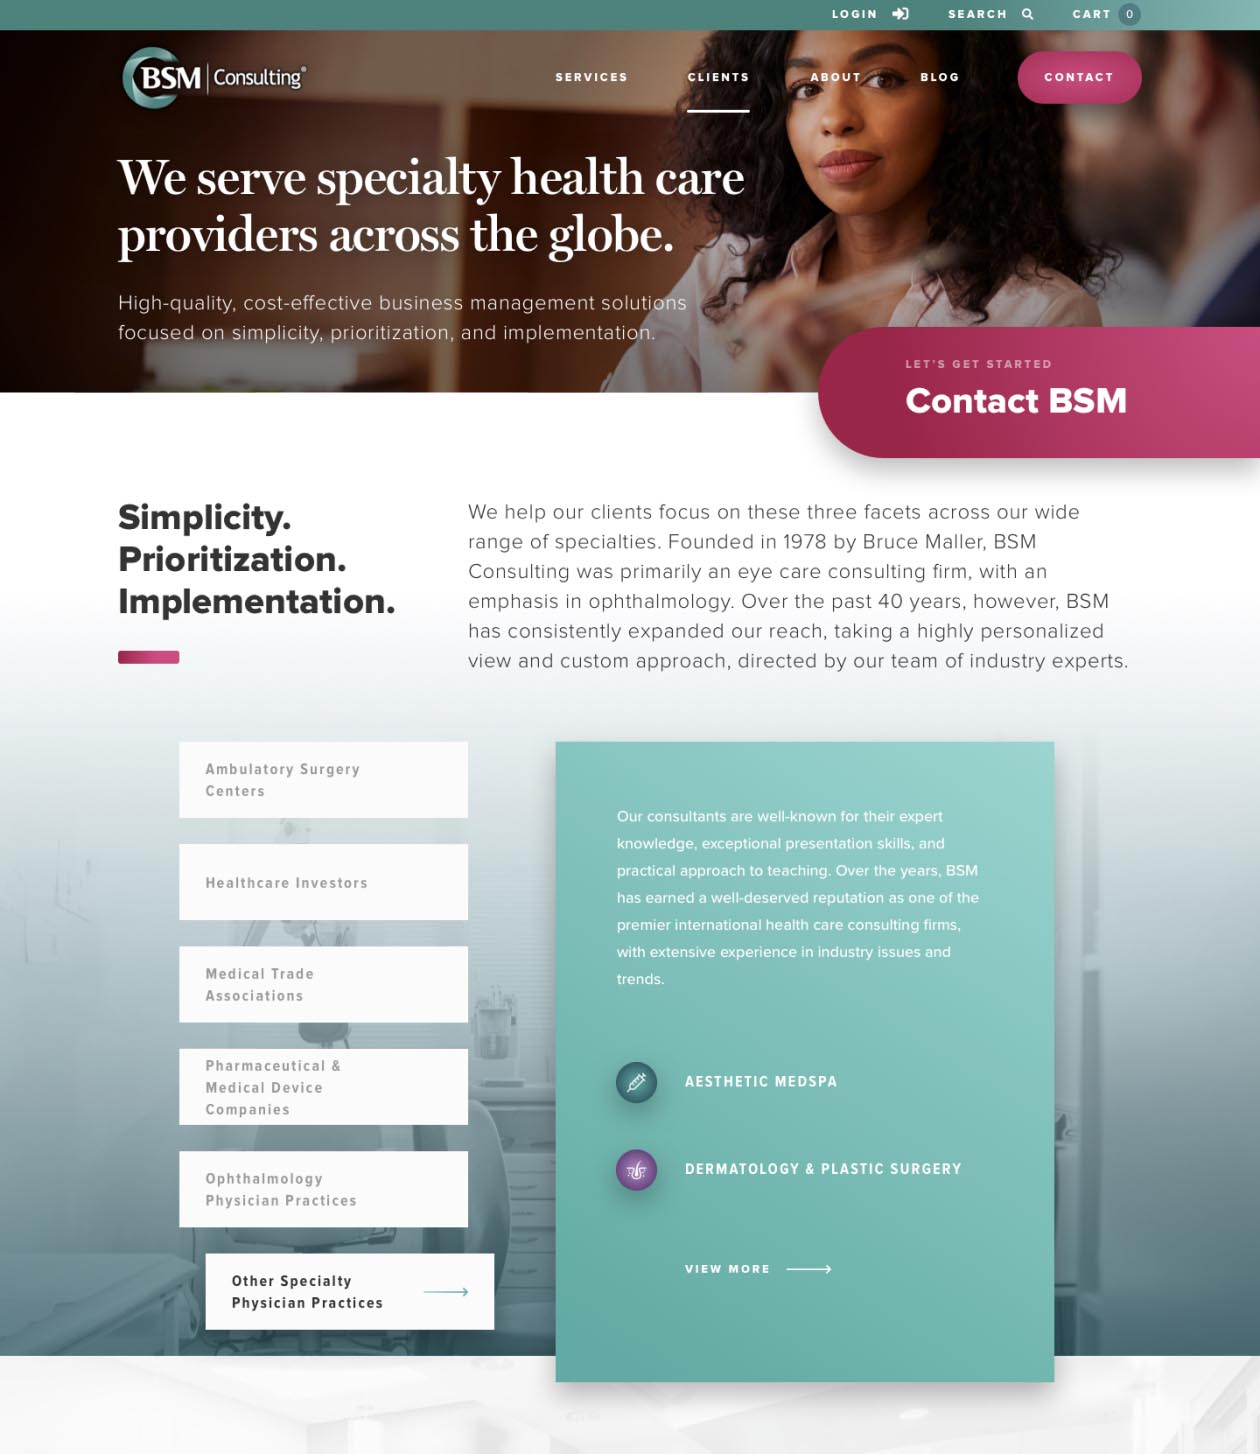 bsmconsulting-webdesign-casestudy-4